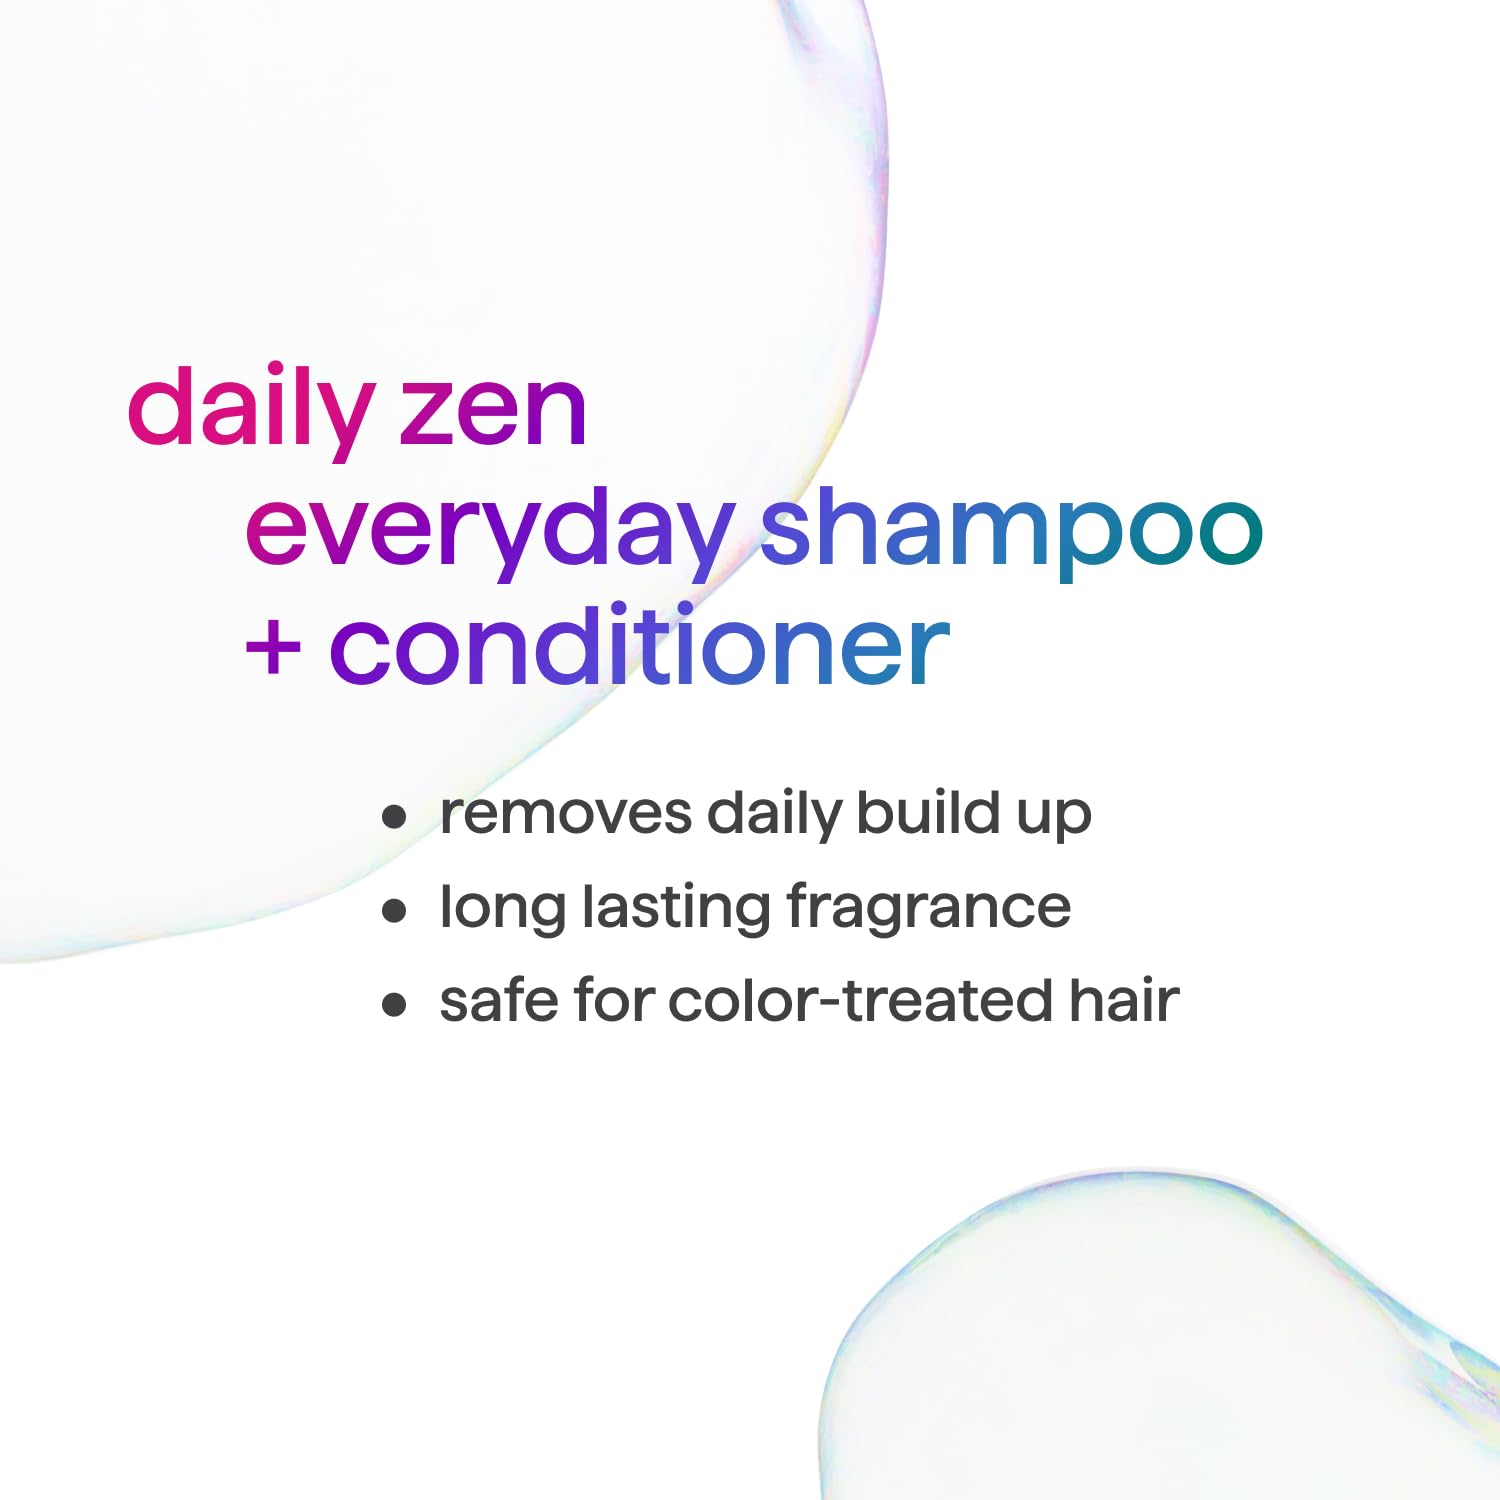 Method Everyday Conditioner, Daily Zen with Cucumber, Green Tea, and Seaweed Scent Notes, Paraben and Sulfate Free, 13.5 oz (Pack of 3) : Beauty & Personal Care